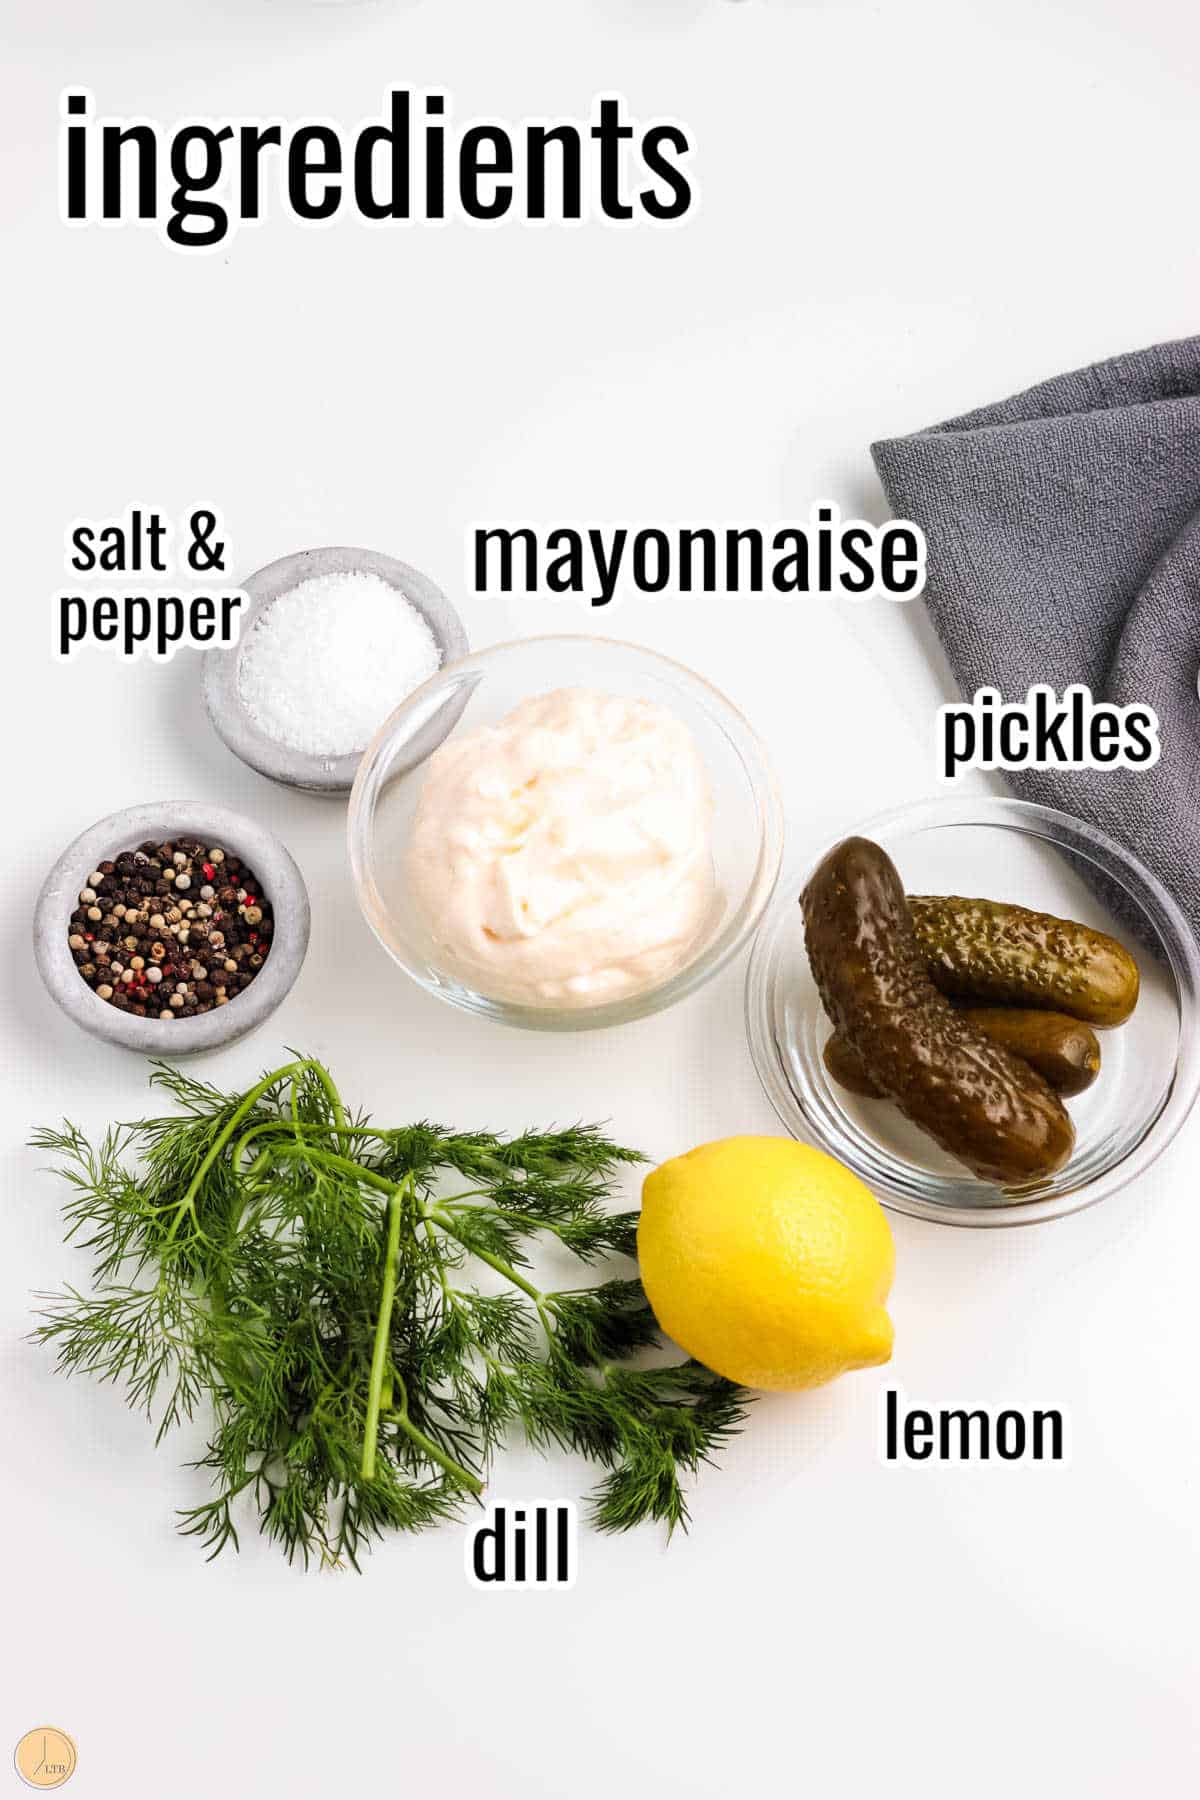 the main ingredient for creamy homemade tartar sauce is dill pickle relish